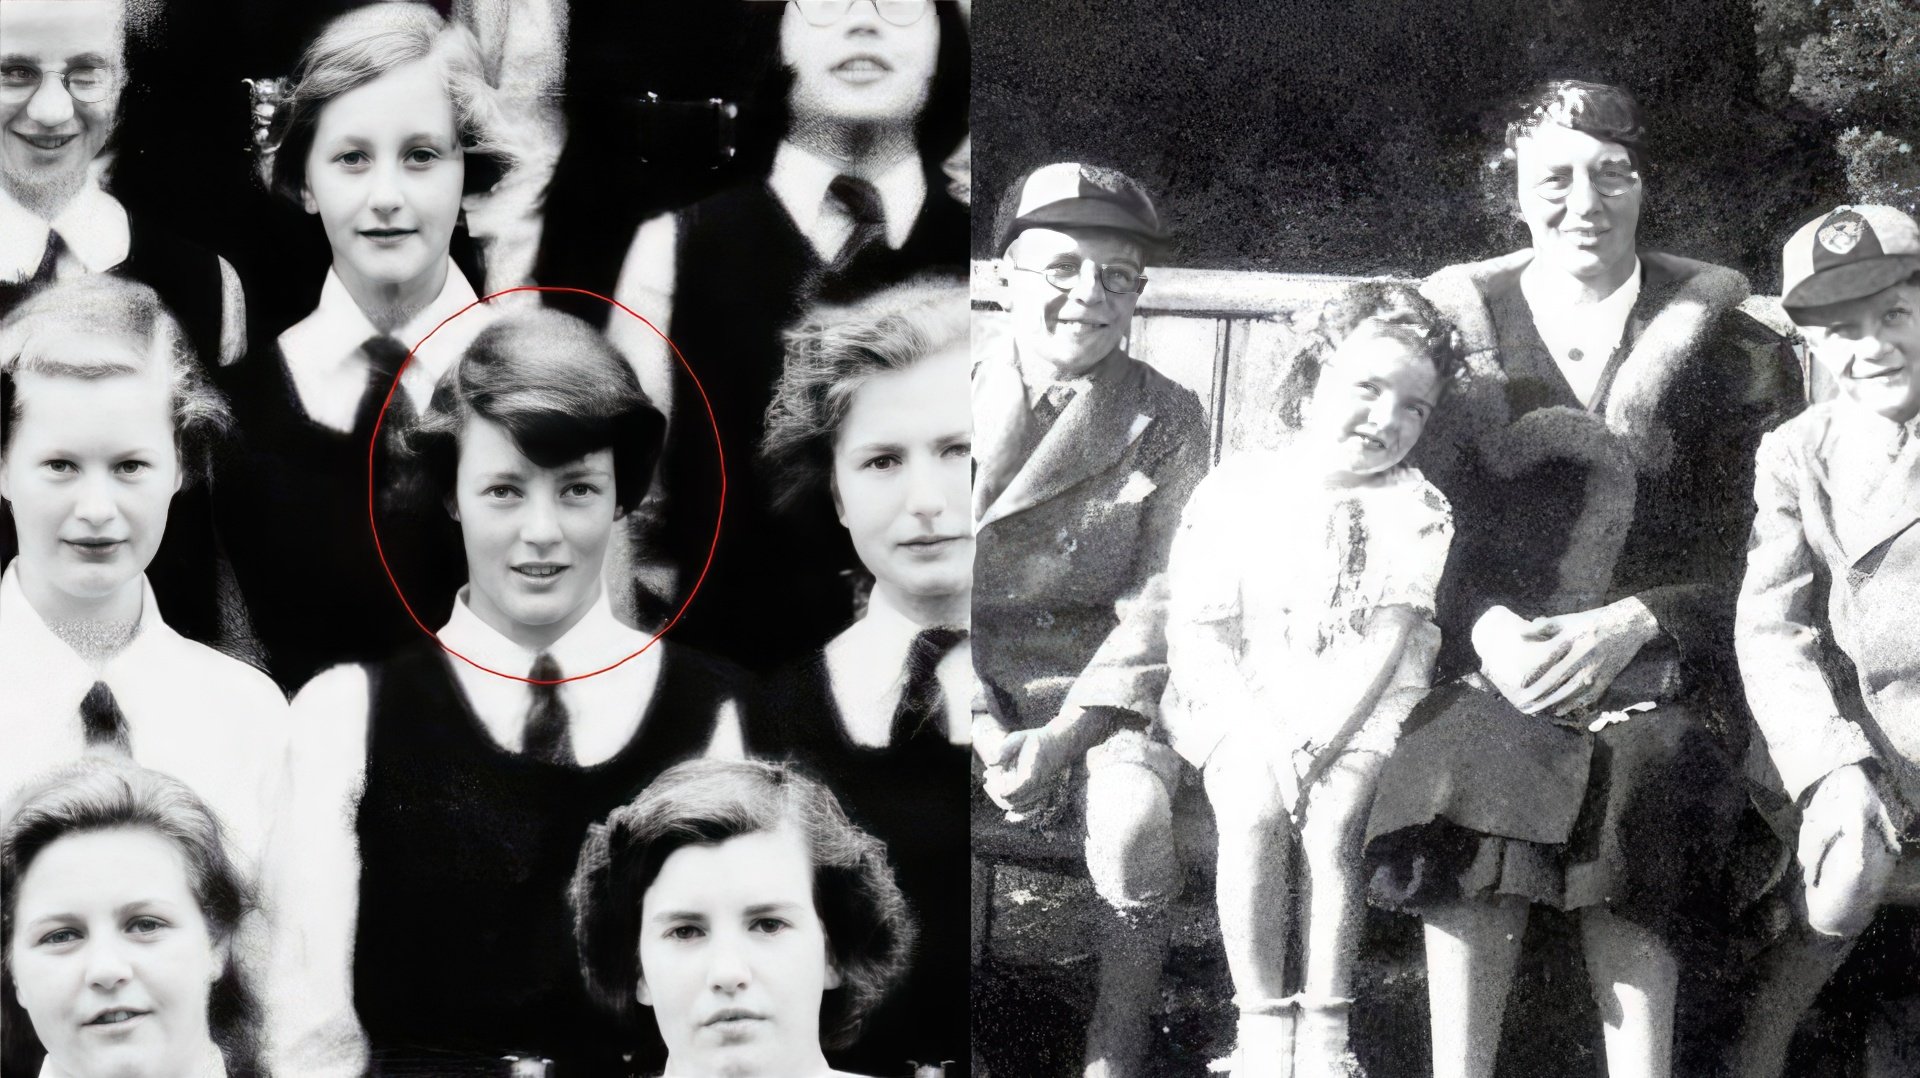 Right: Maggie Smith with her mother and brothers, left - at 16 years old at school